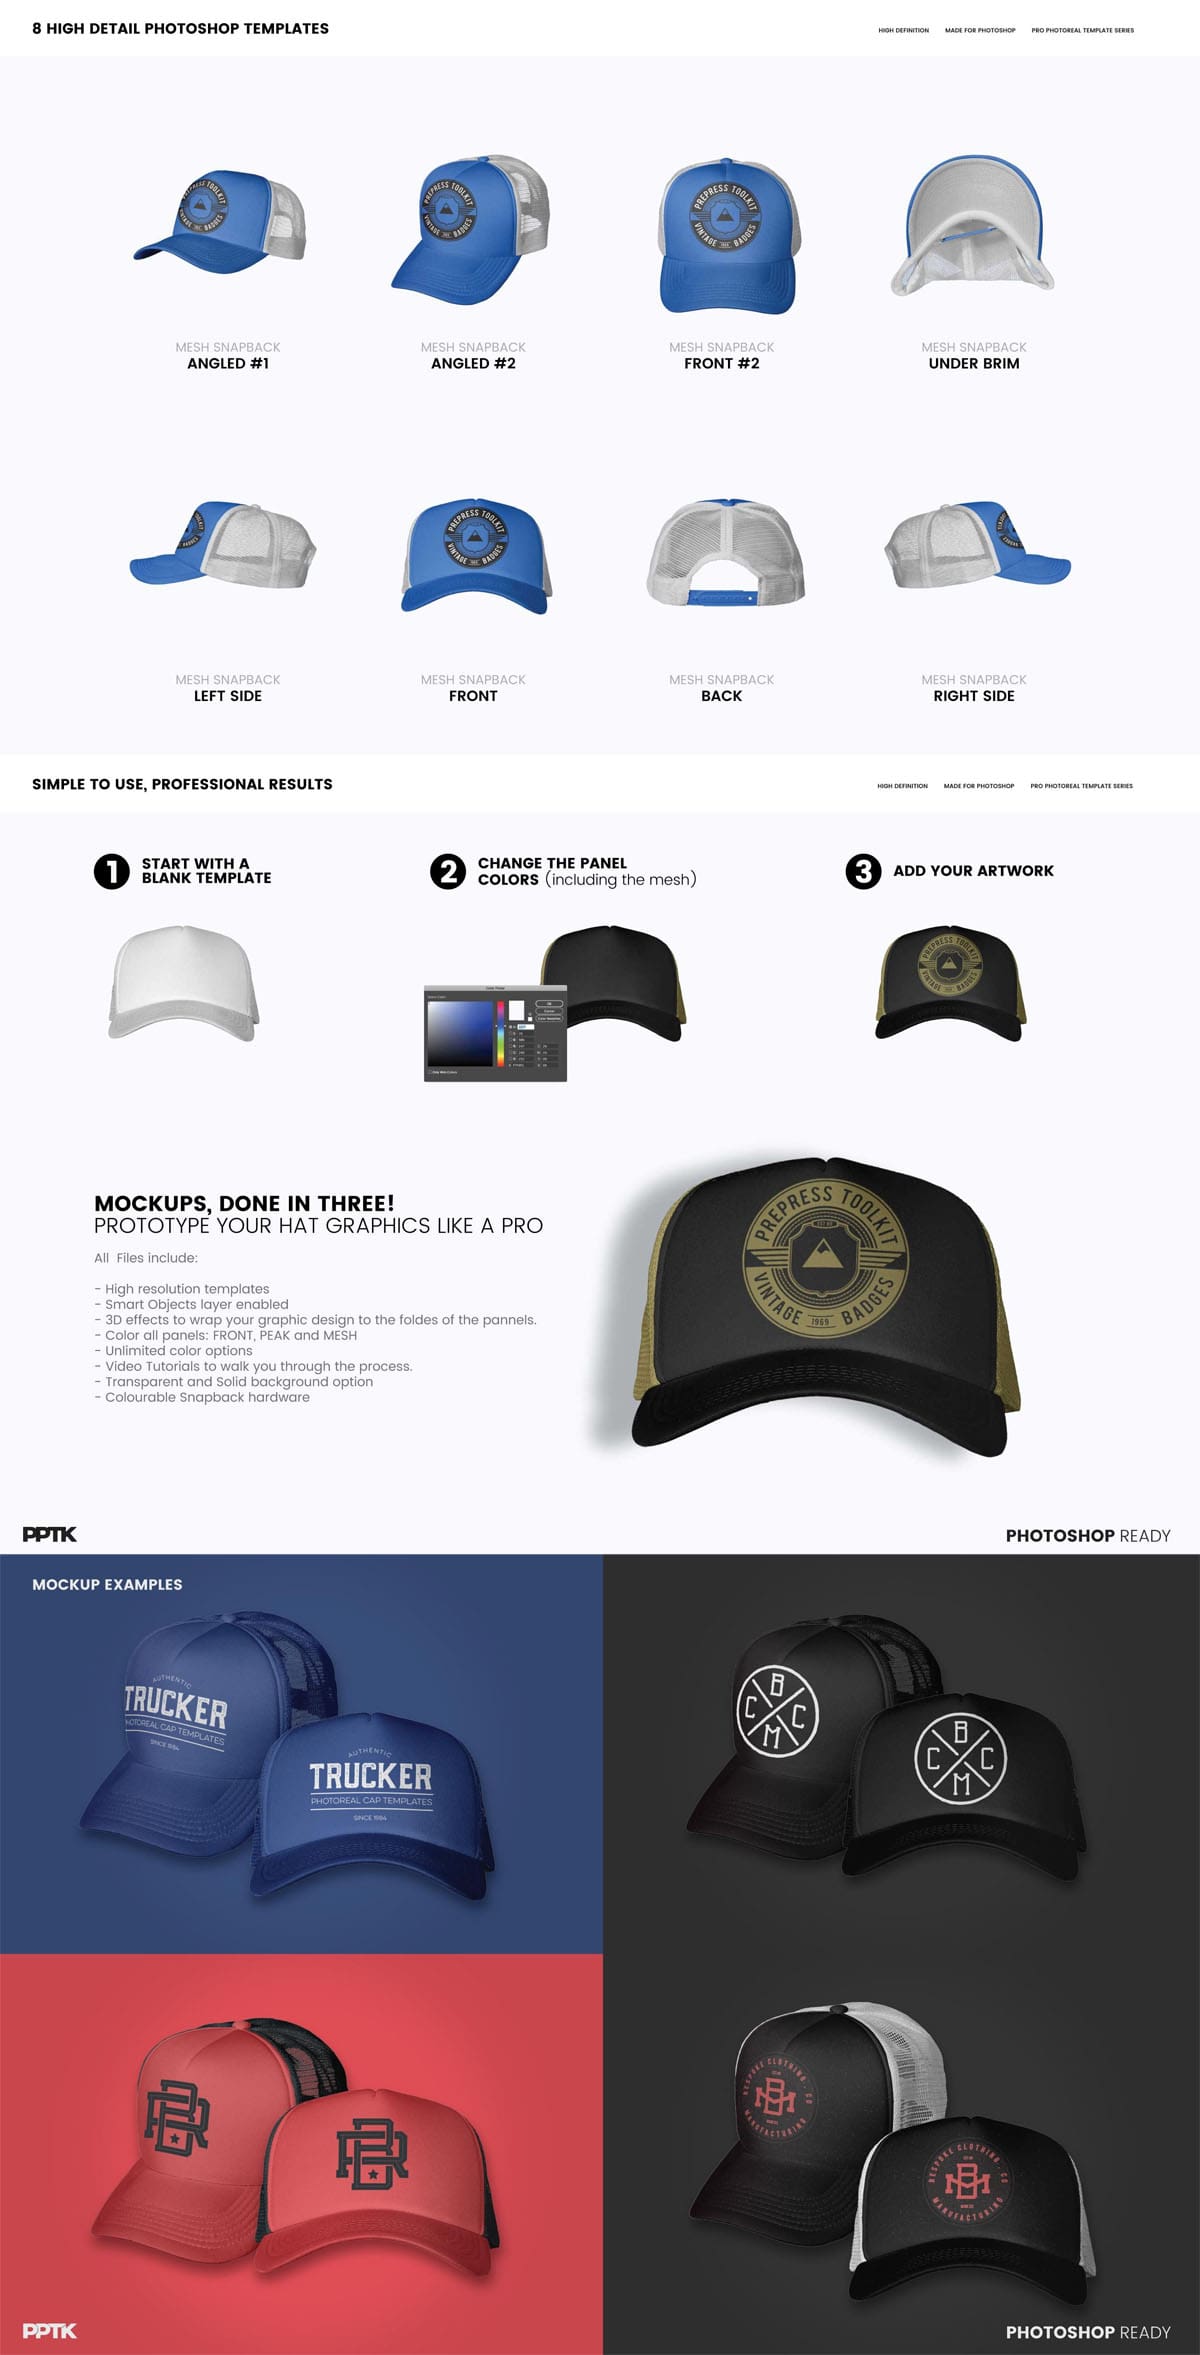 Download Trucker Cap Photoshop Template Find The Perfect Creative Mockups Freebies To Showcase Your Project To Life PSD Mockup Templates